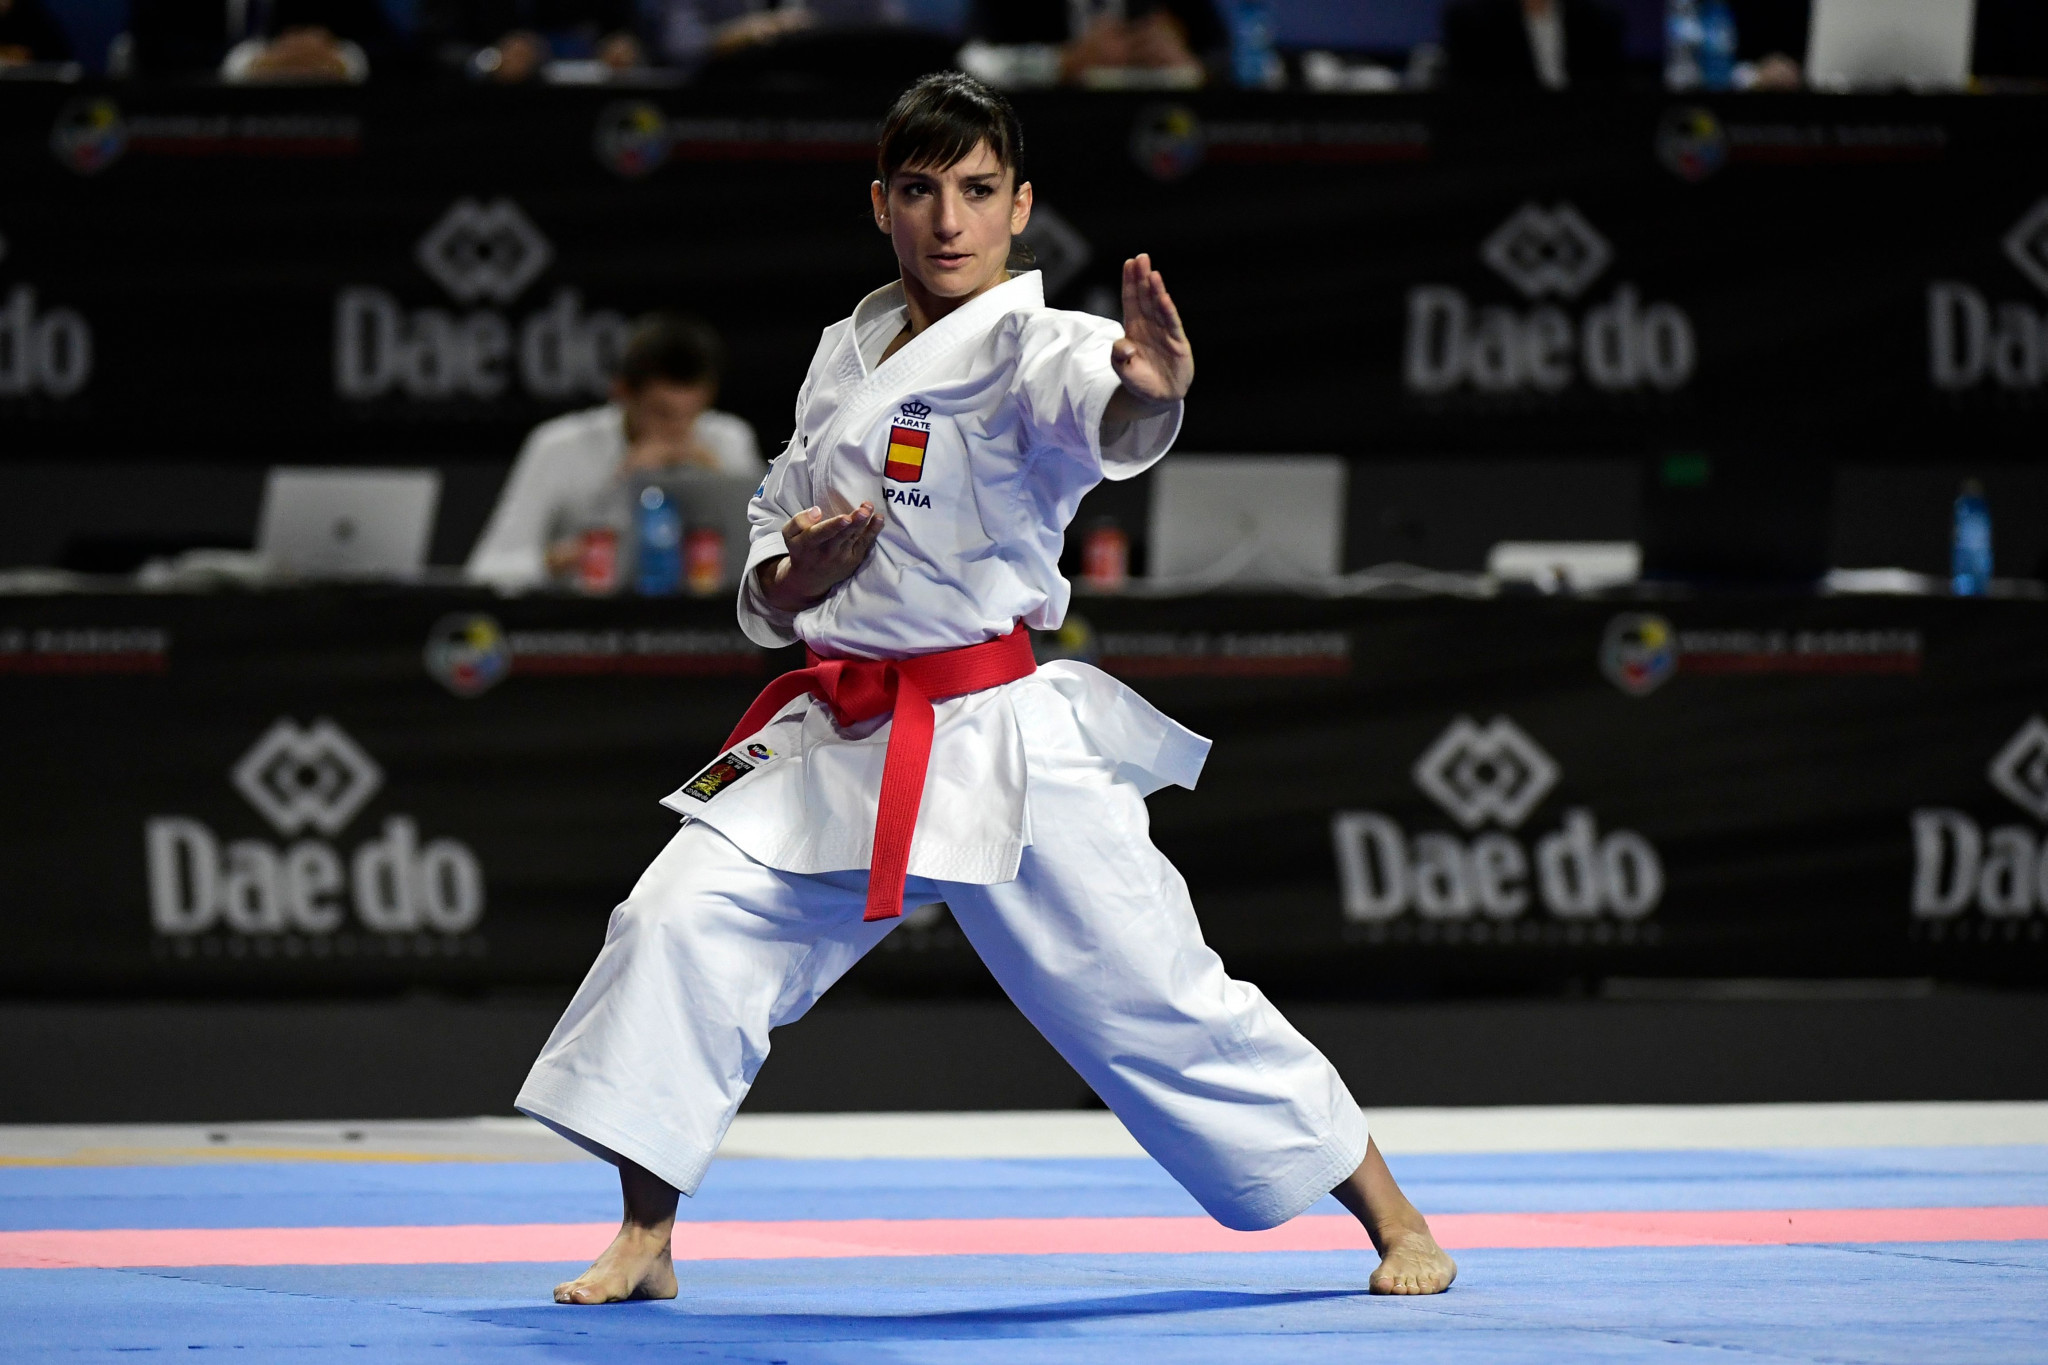 Karate was dropped from the Paris 2024 programme before its Olympic debut at Tokyo 2020 ©Getty Images